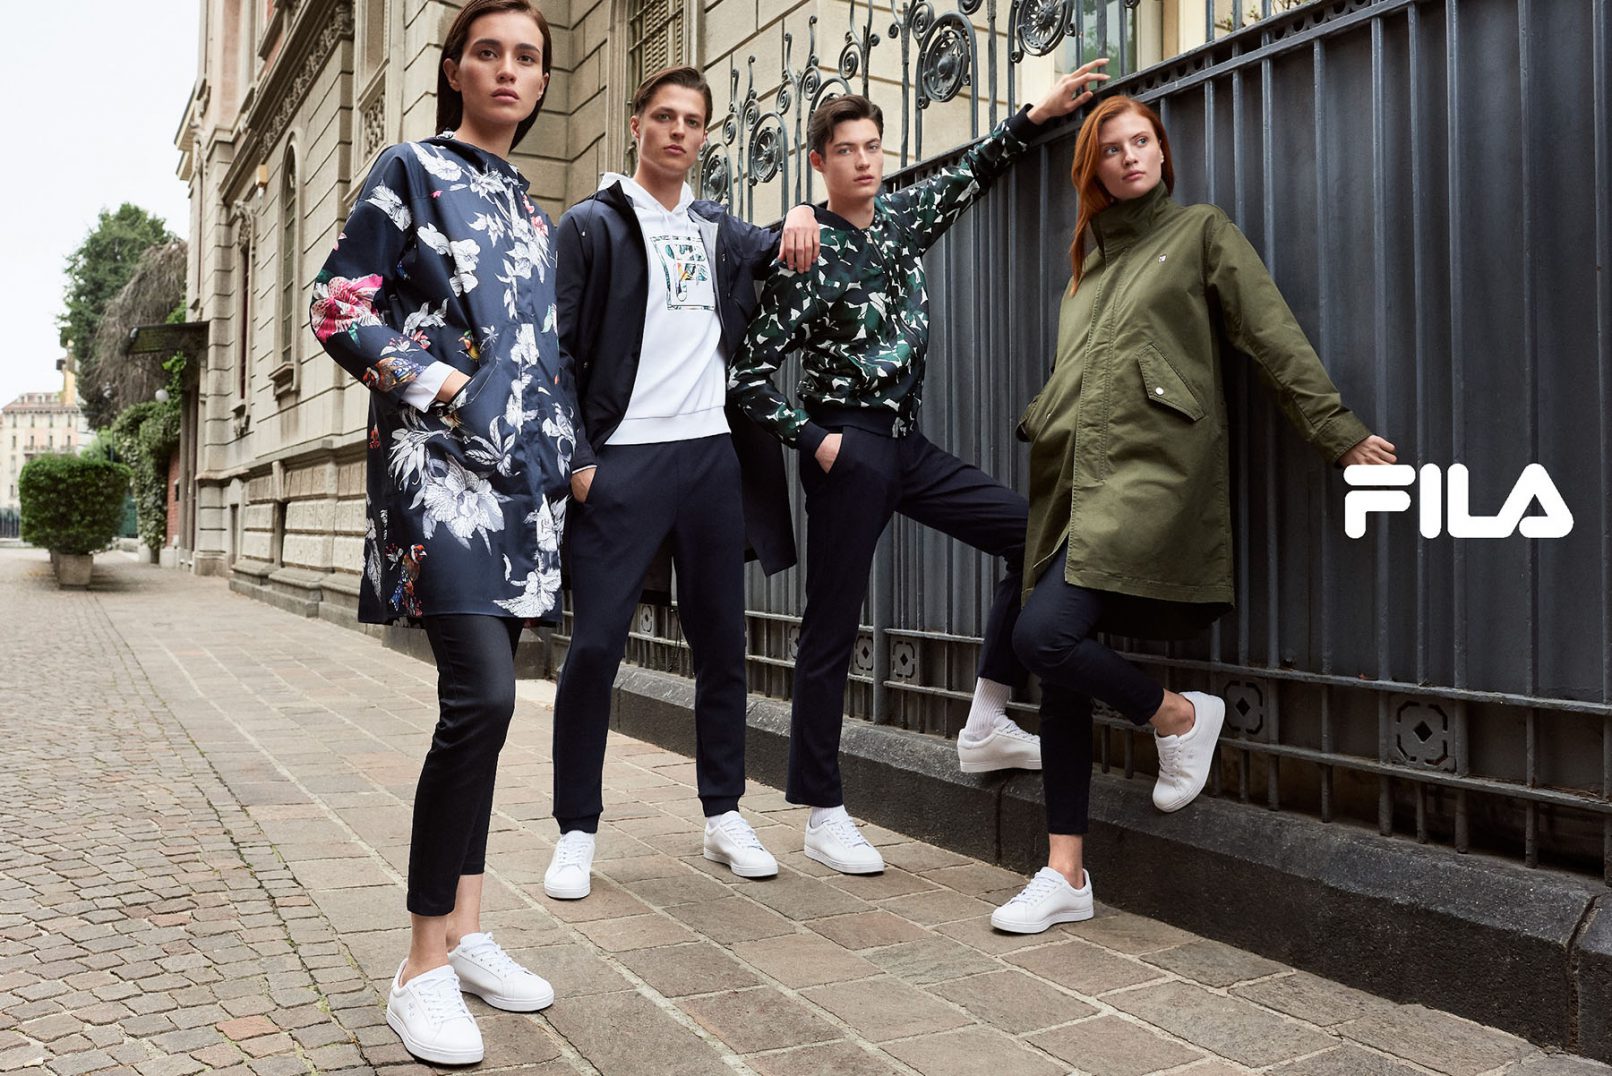 Fila Cina AW 2018 Advertising image shot in Milan by portrait, advertising and commercial photographer David Umberto Zappa. Talents posing in front of a fence in downtown Milan. Immagine pubblicitaria scattata da David Umberto Zappa, fotografo commerciale, pubblicitario, editoriale, a Milano.